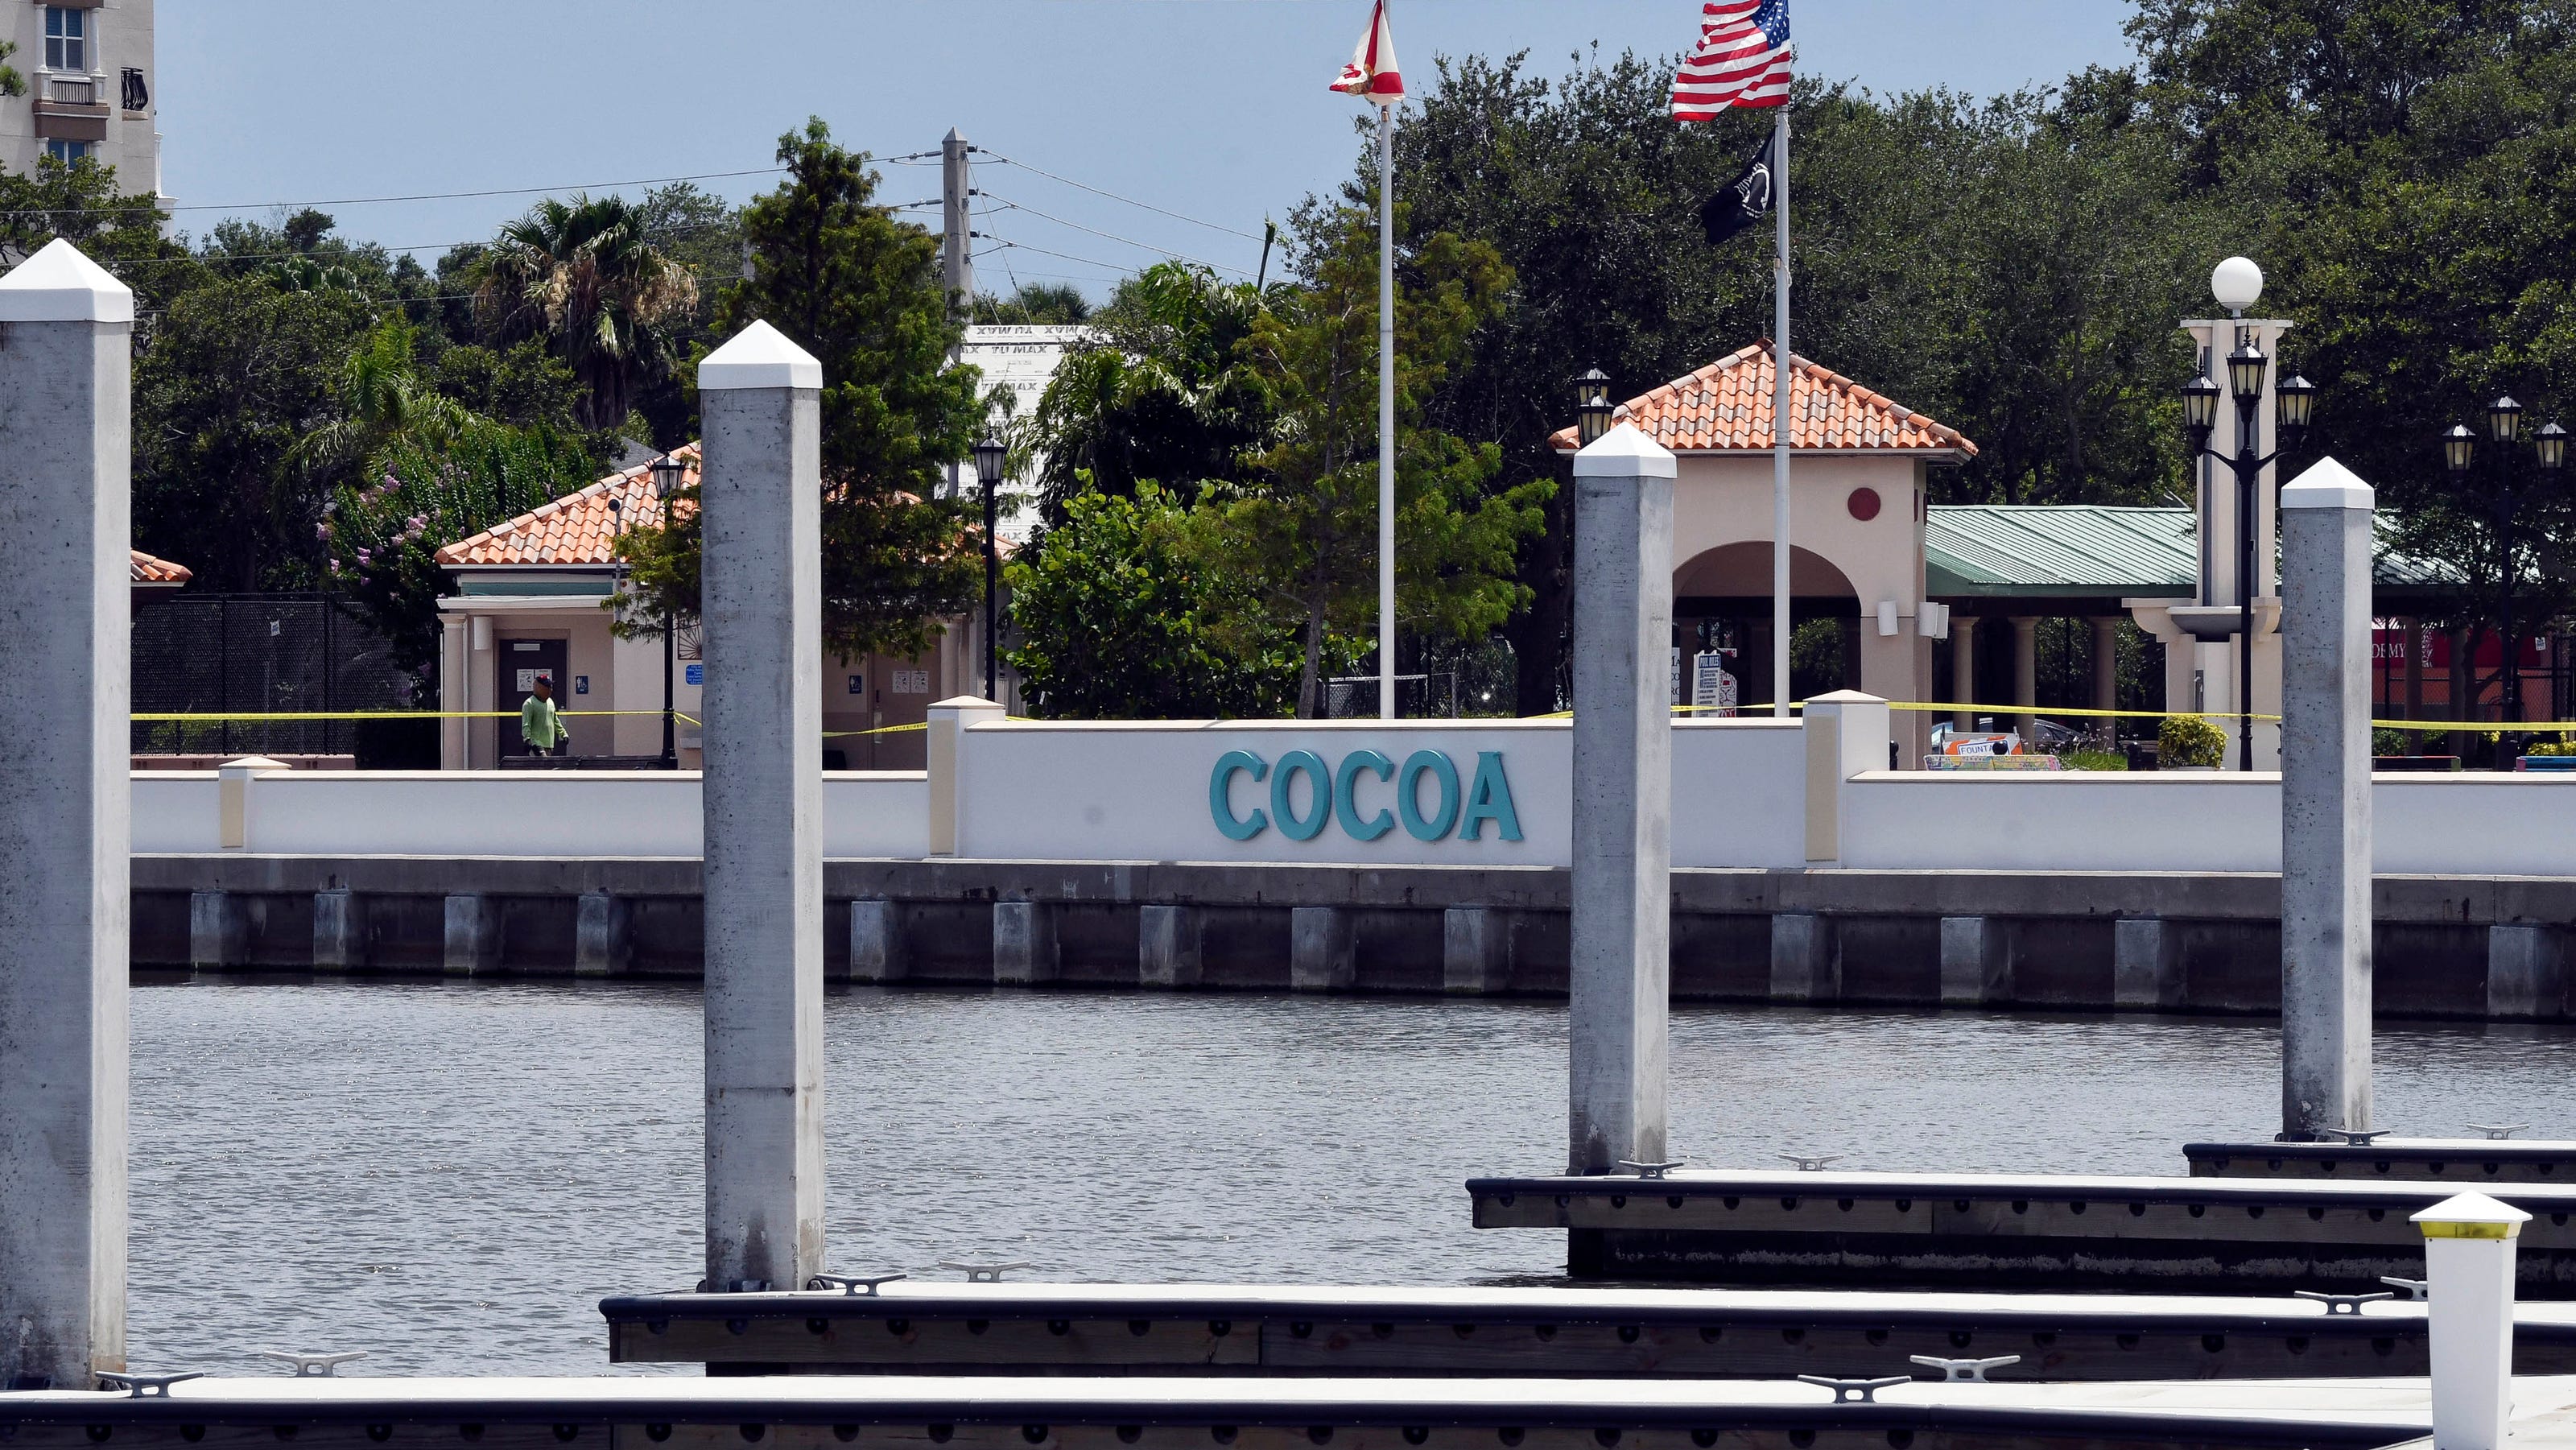 Cocoa Village waterfront reopens just in time for July 4